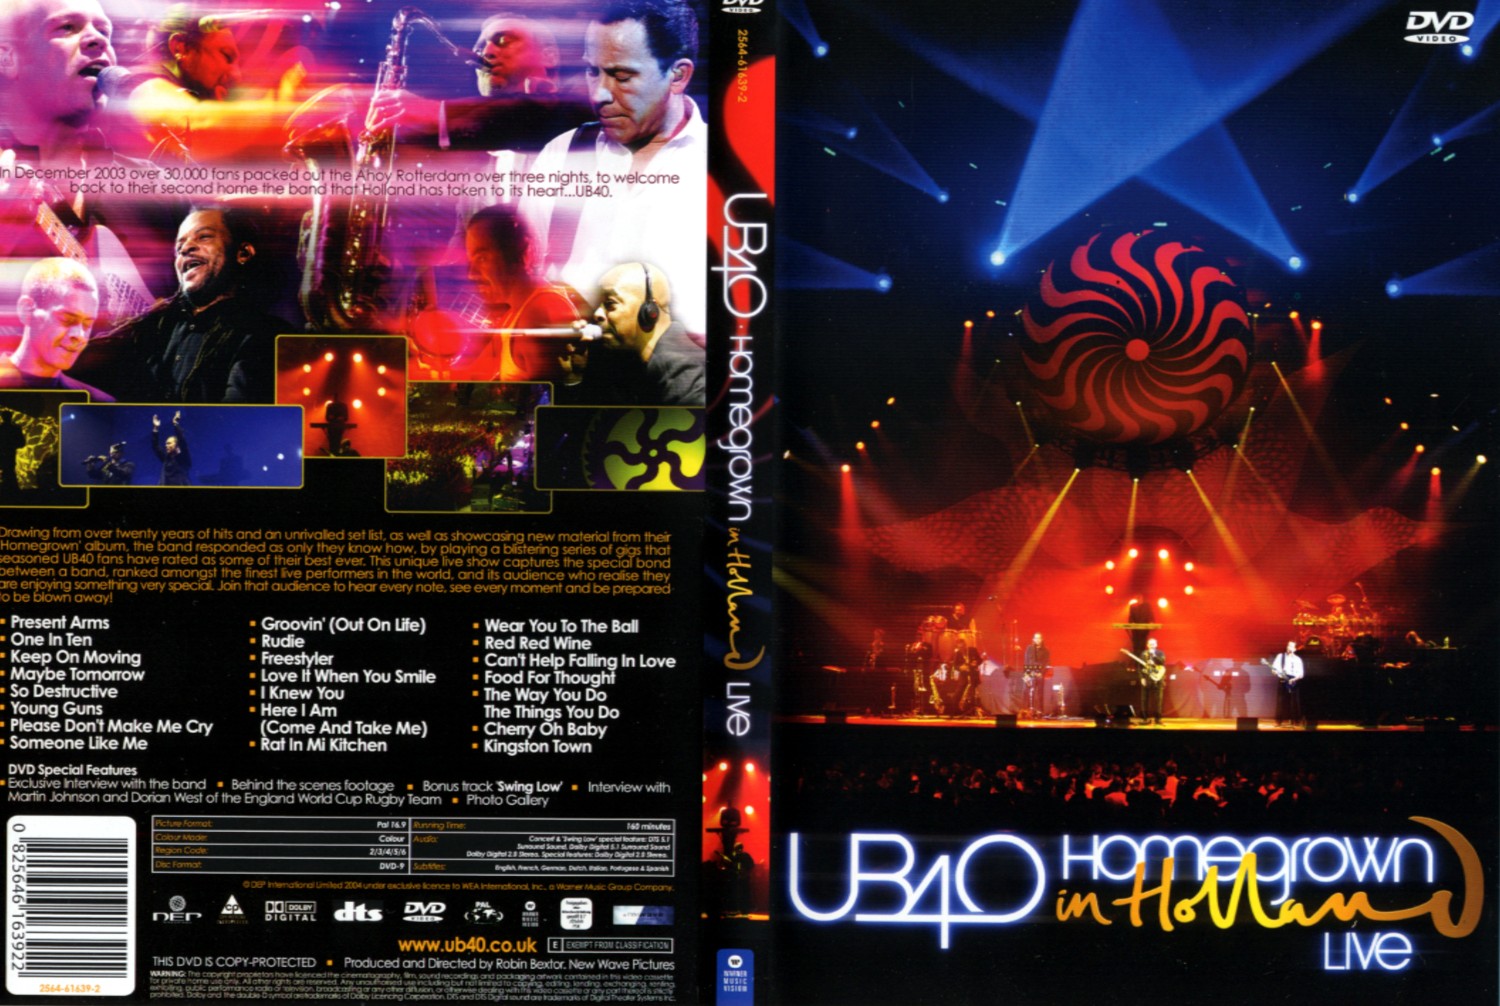 Jaquette DVD UB40 homegrawn in hollano live